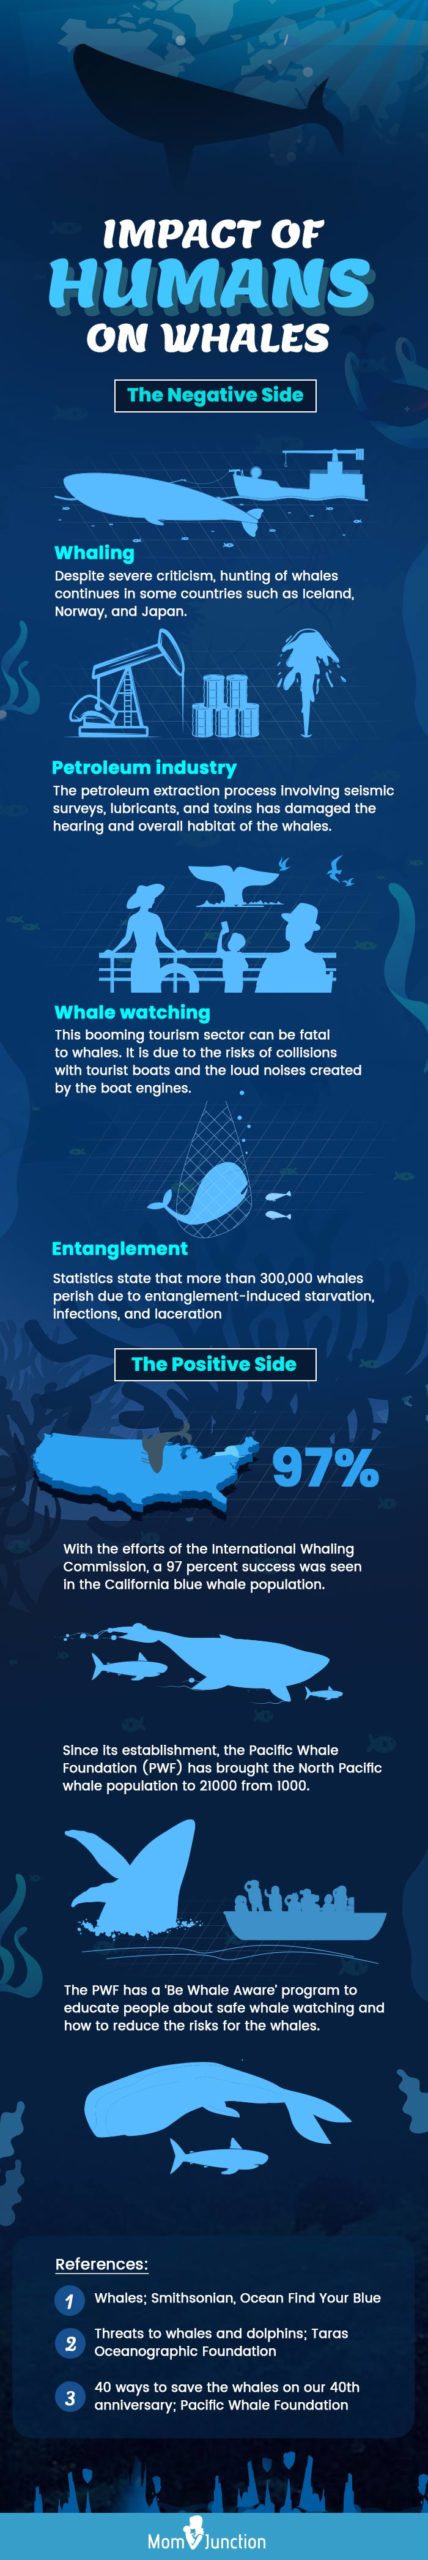 impact of humans on whales (infographic)